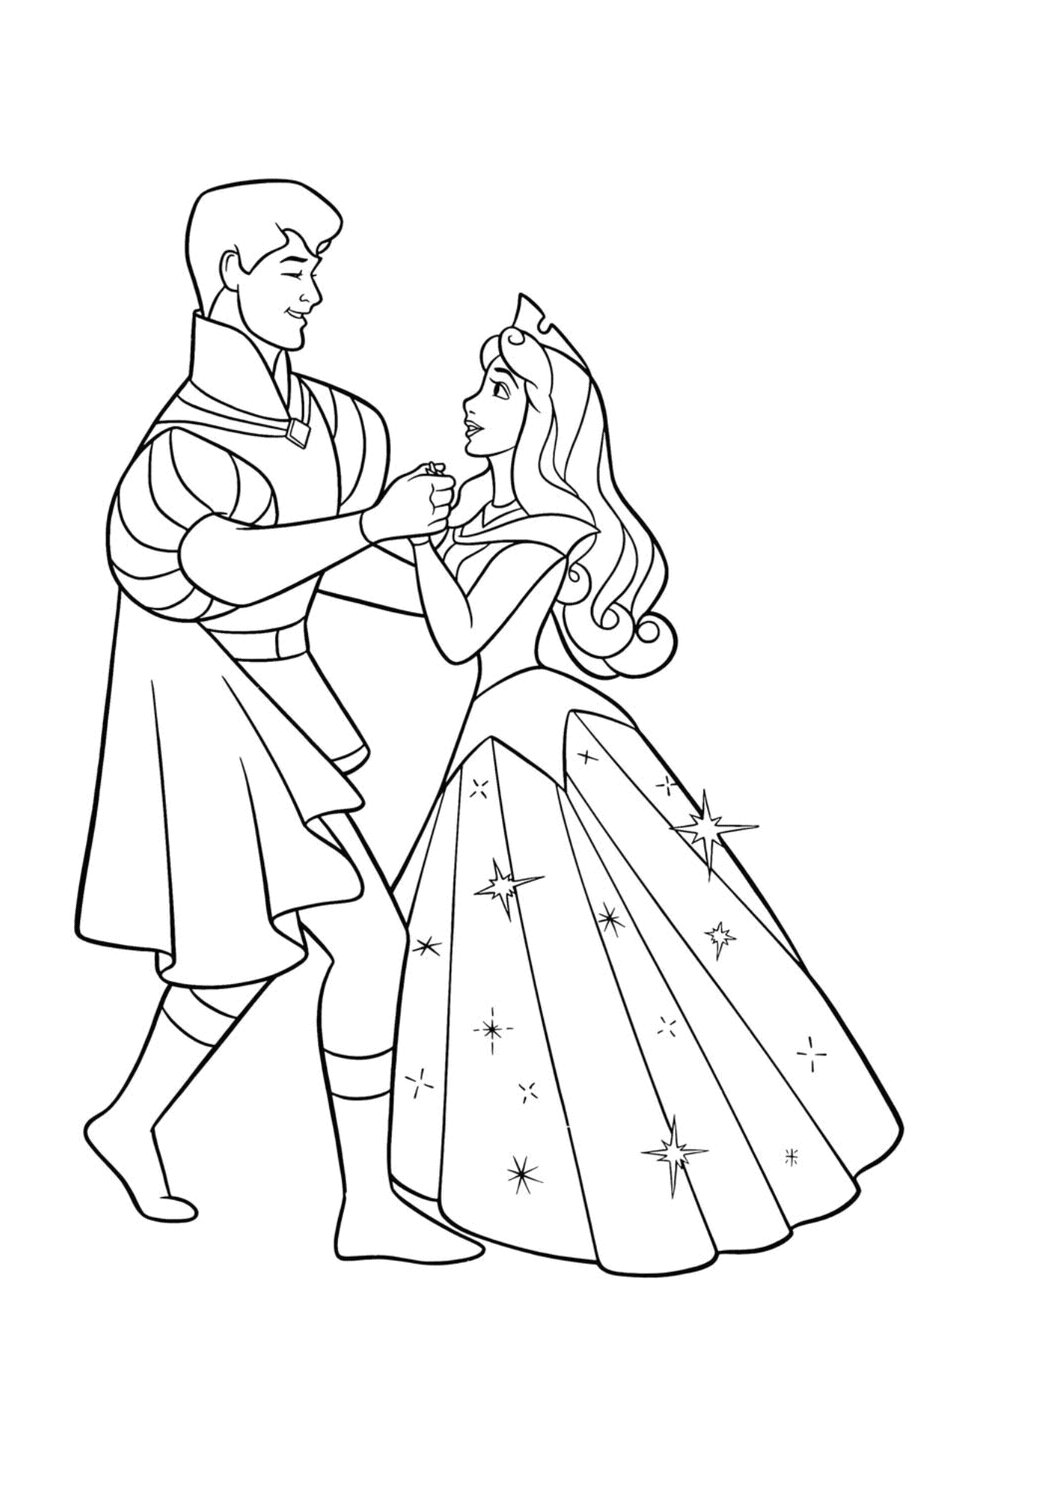 The Princess and the Prince coloring book to print and online Hol dir